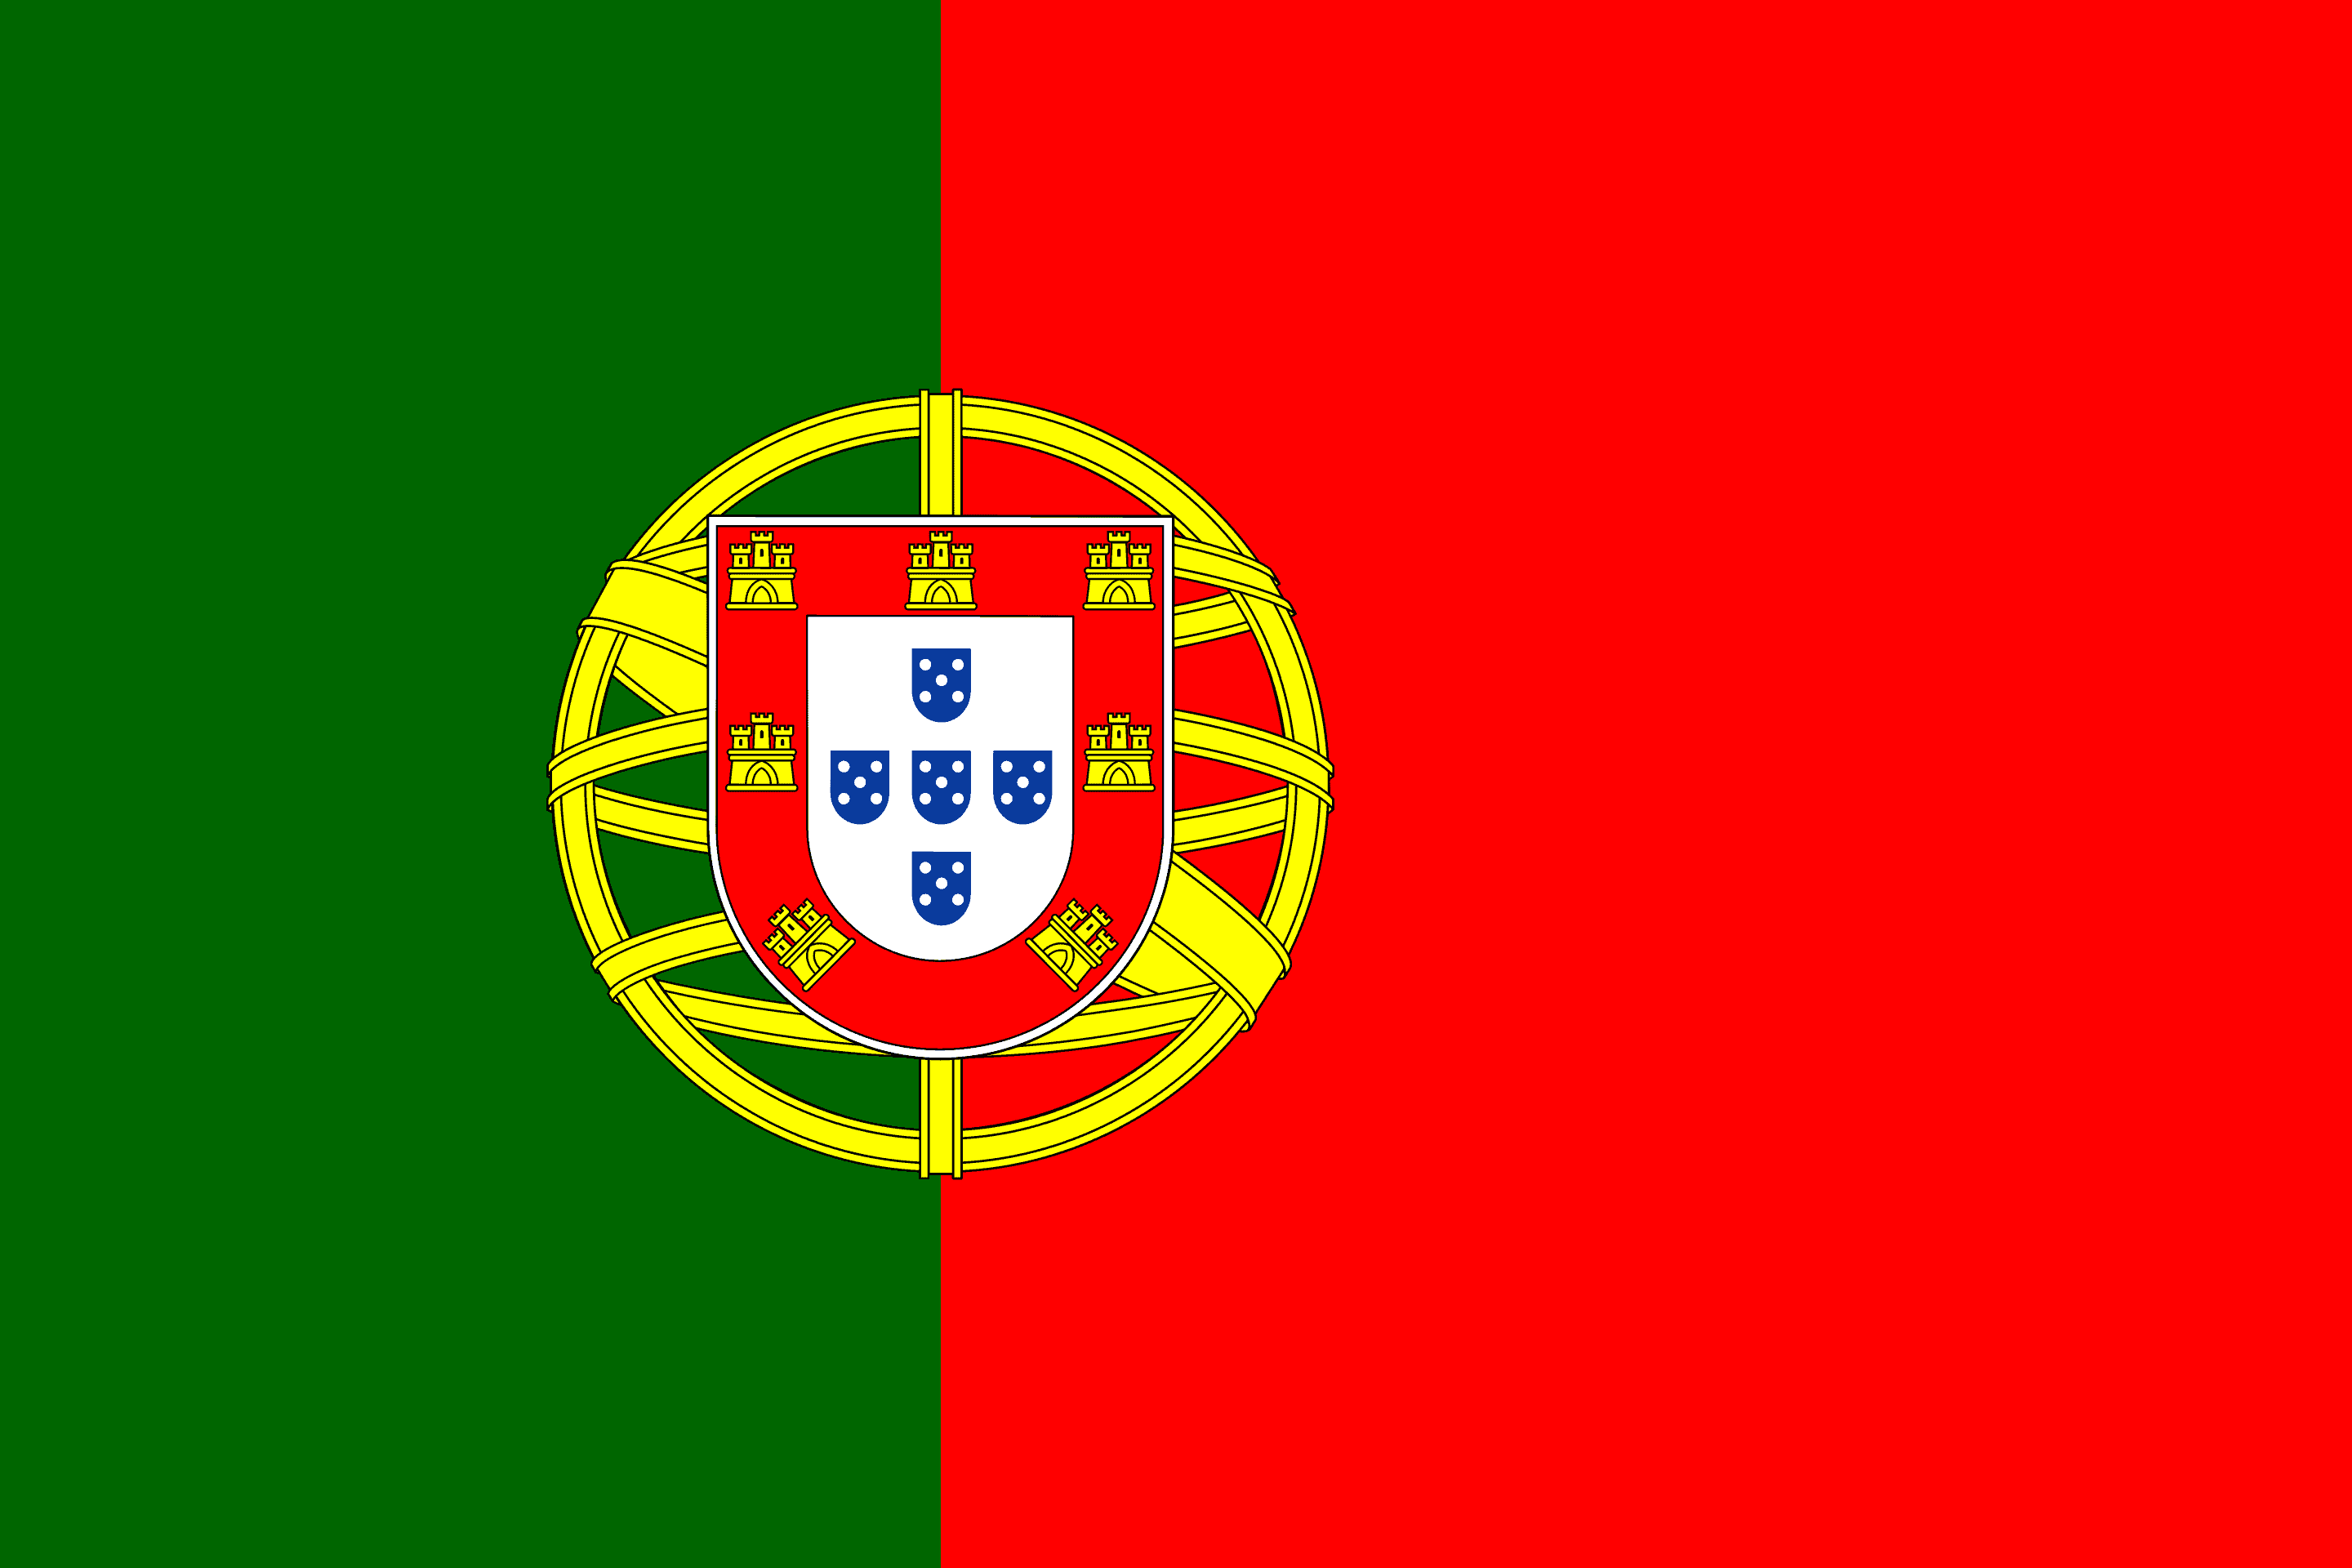 Drone Laws in Portugal